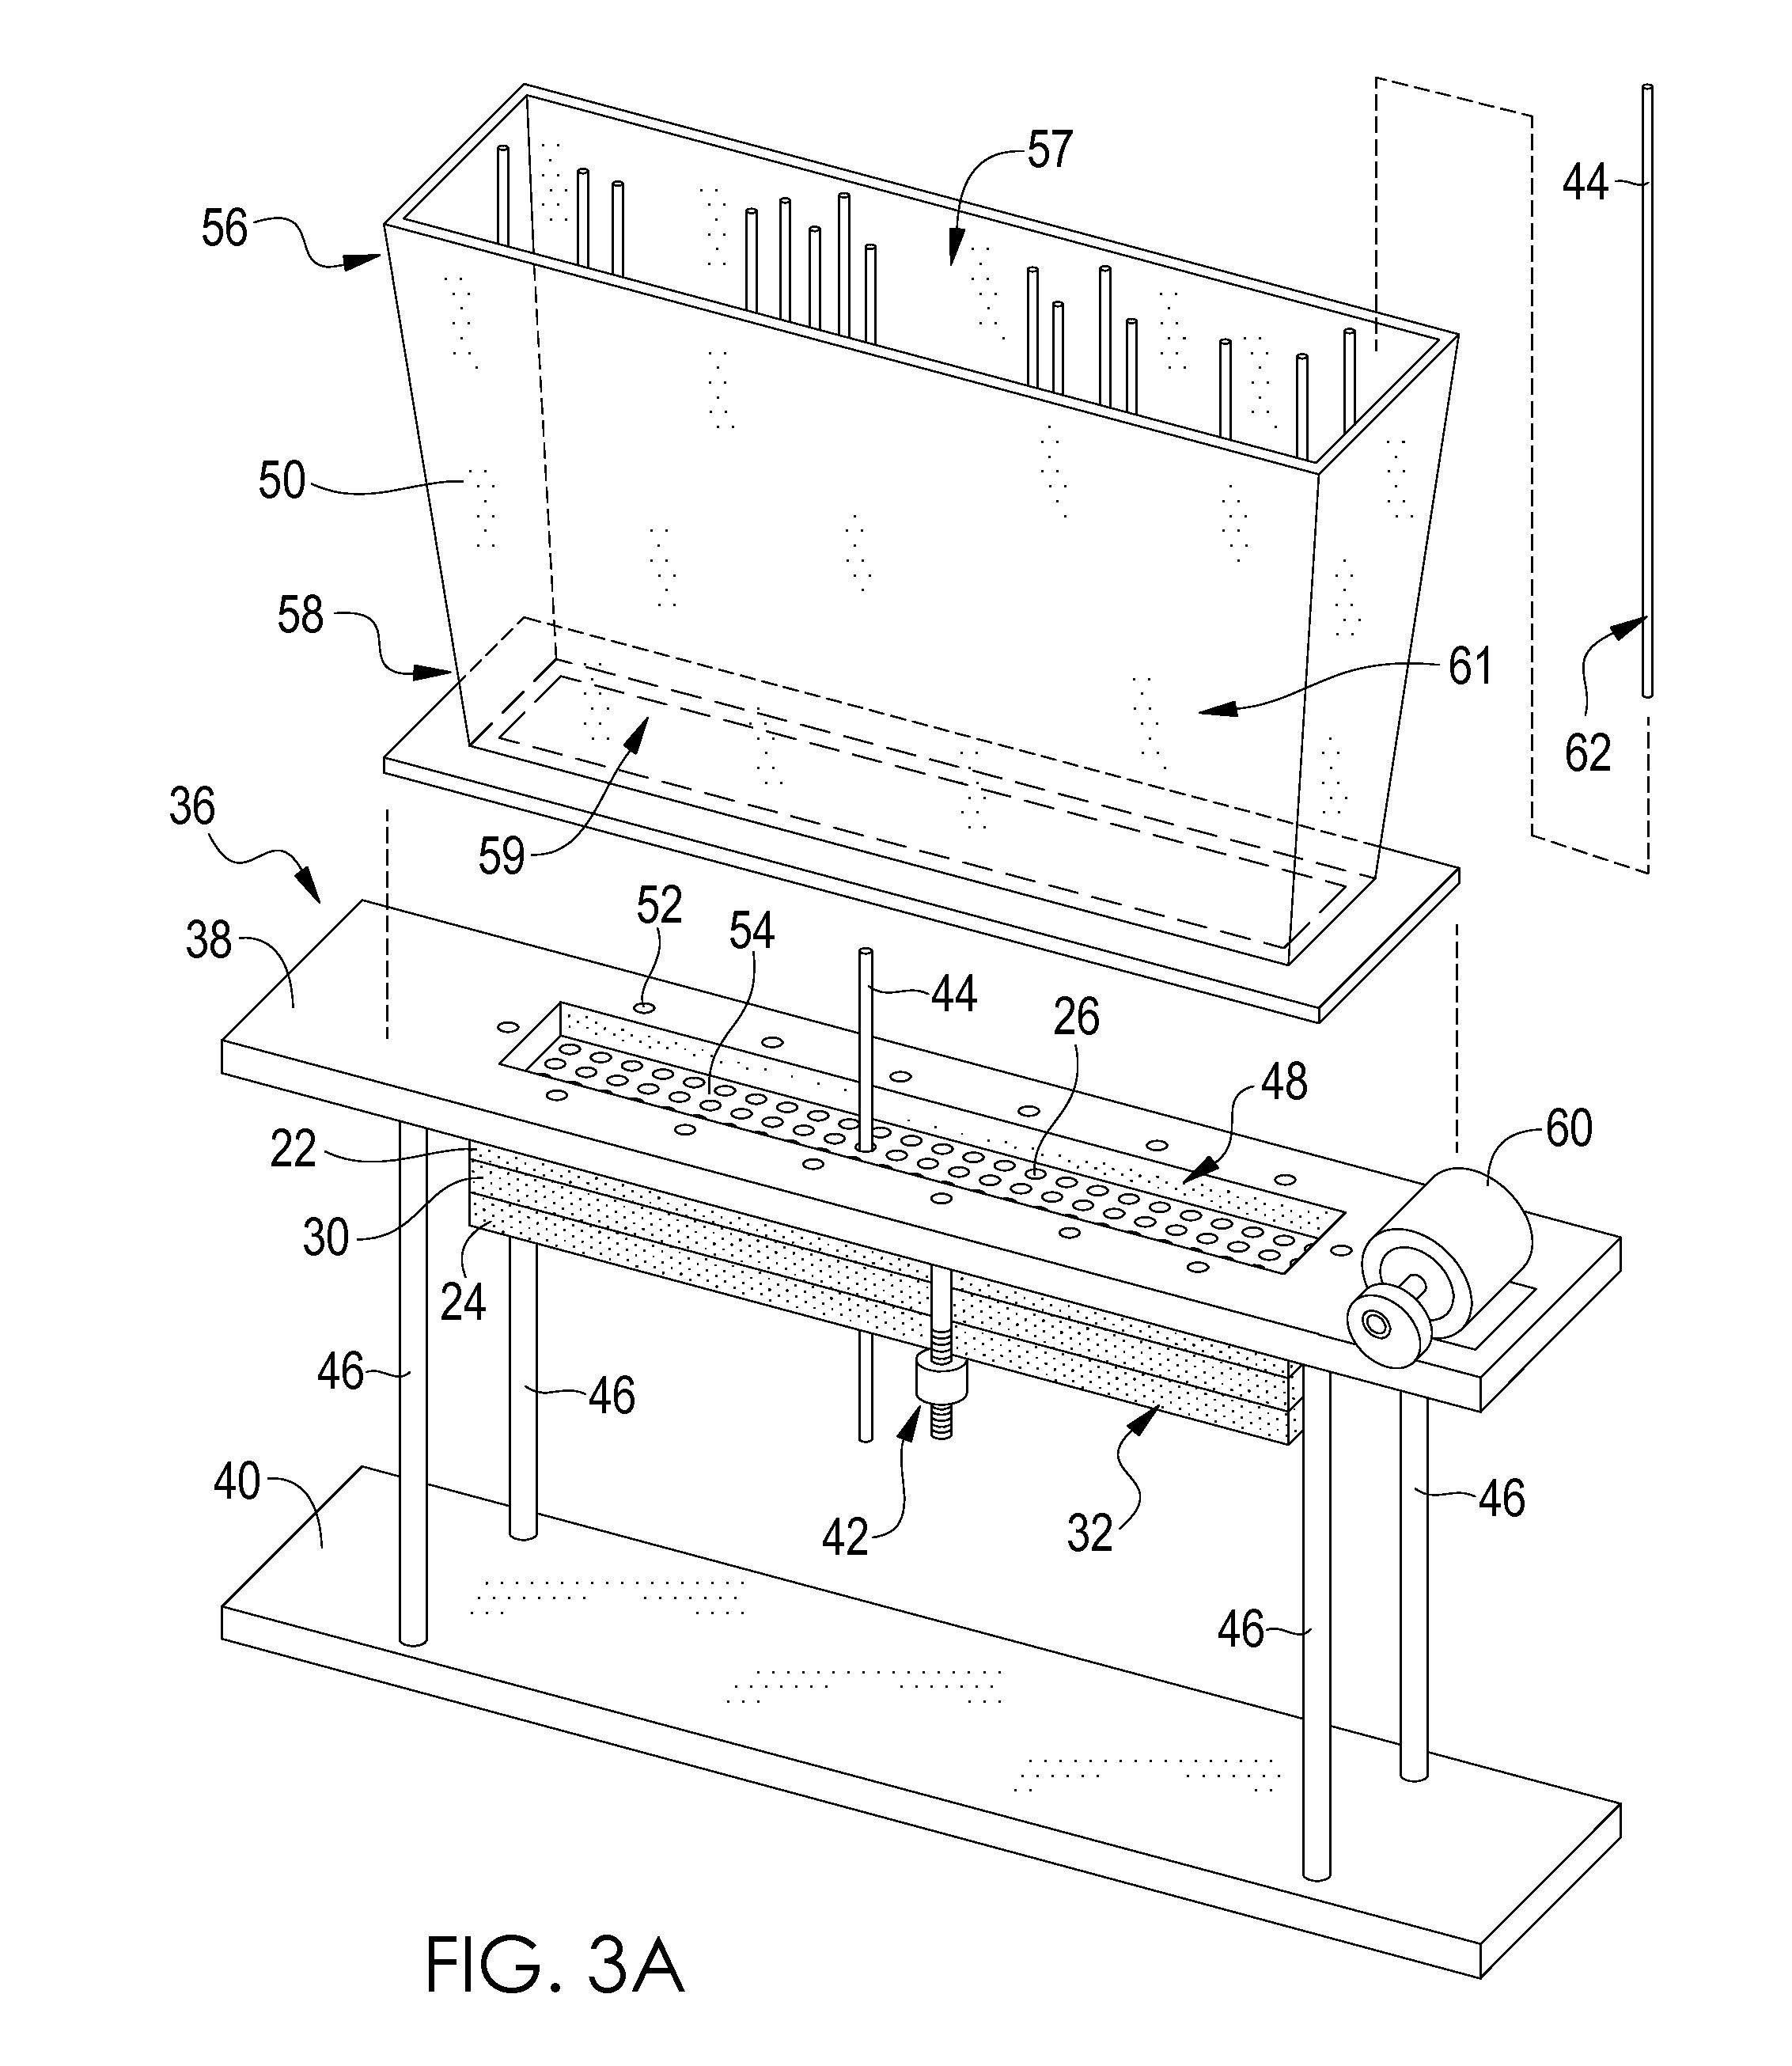 Method for Manufacturing A Micro Tube Heat Exchanger